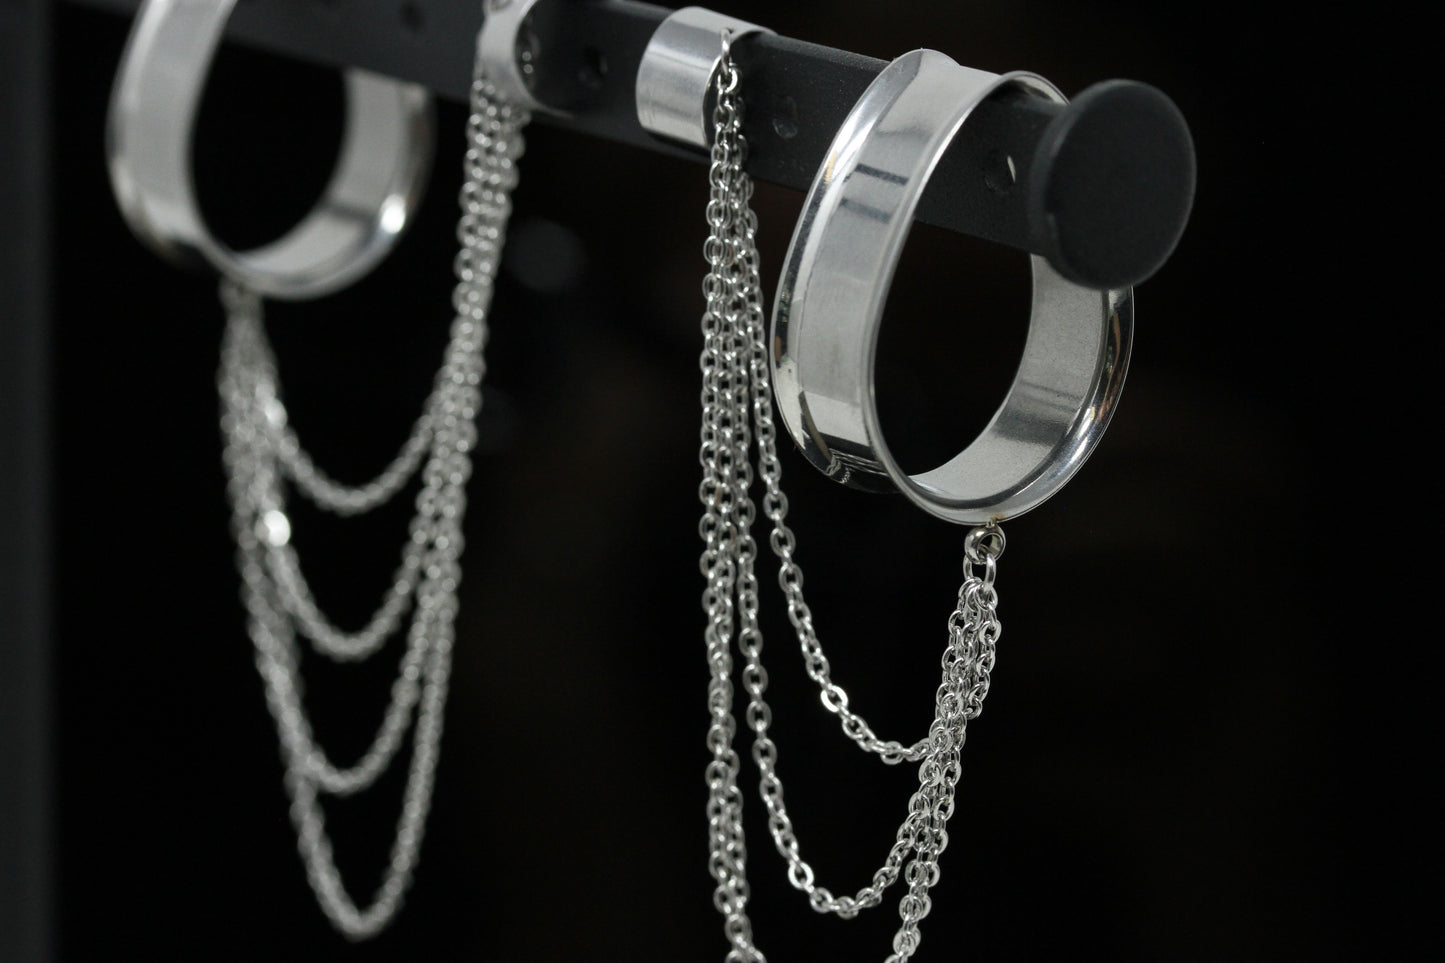 Teardrop Tunnels with cuff clip chain (Pair) - PSS154